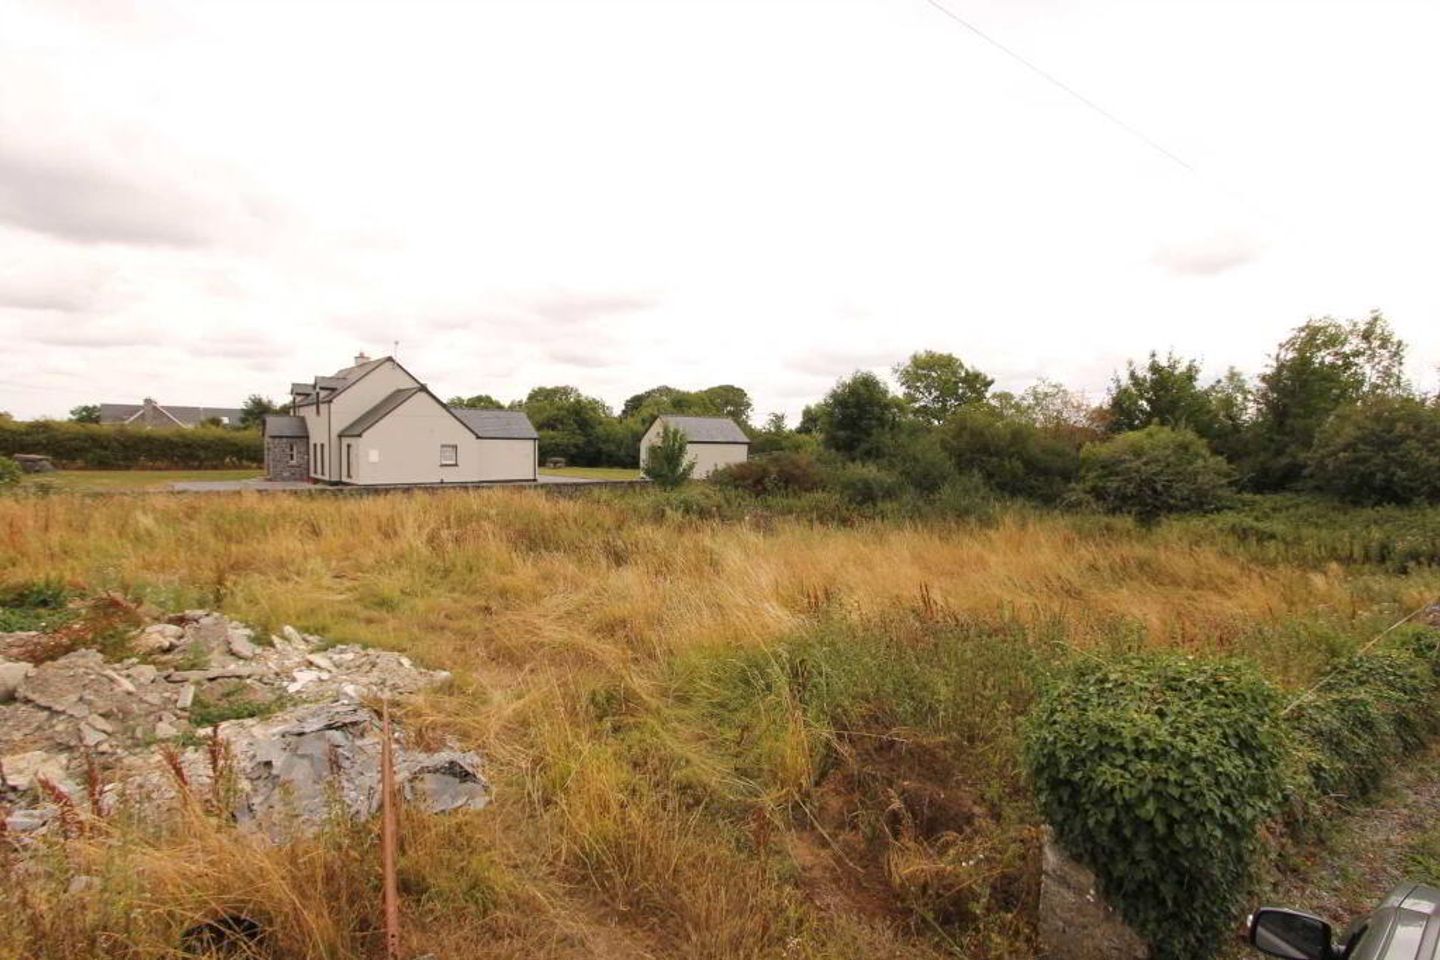 0.47 Acres), Terryglass (, Nenagh, Co. Tipperary